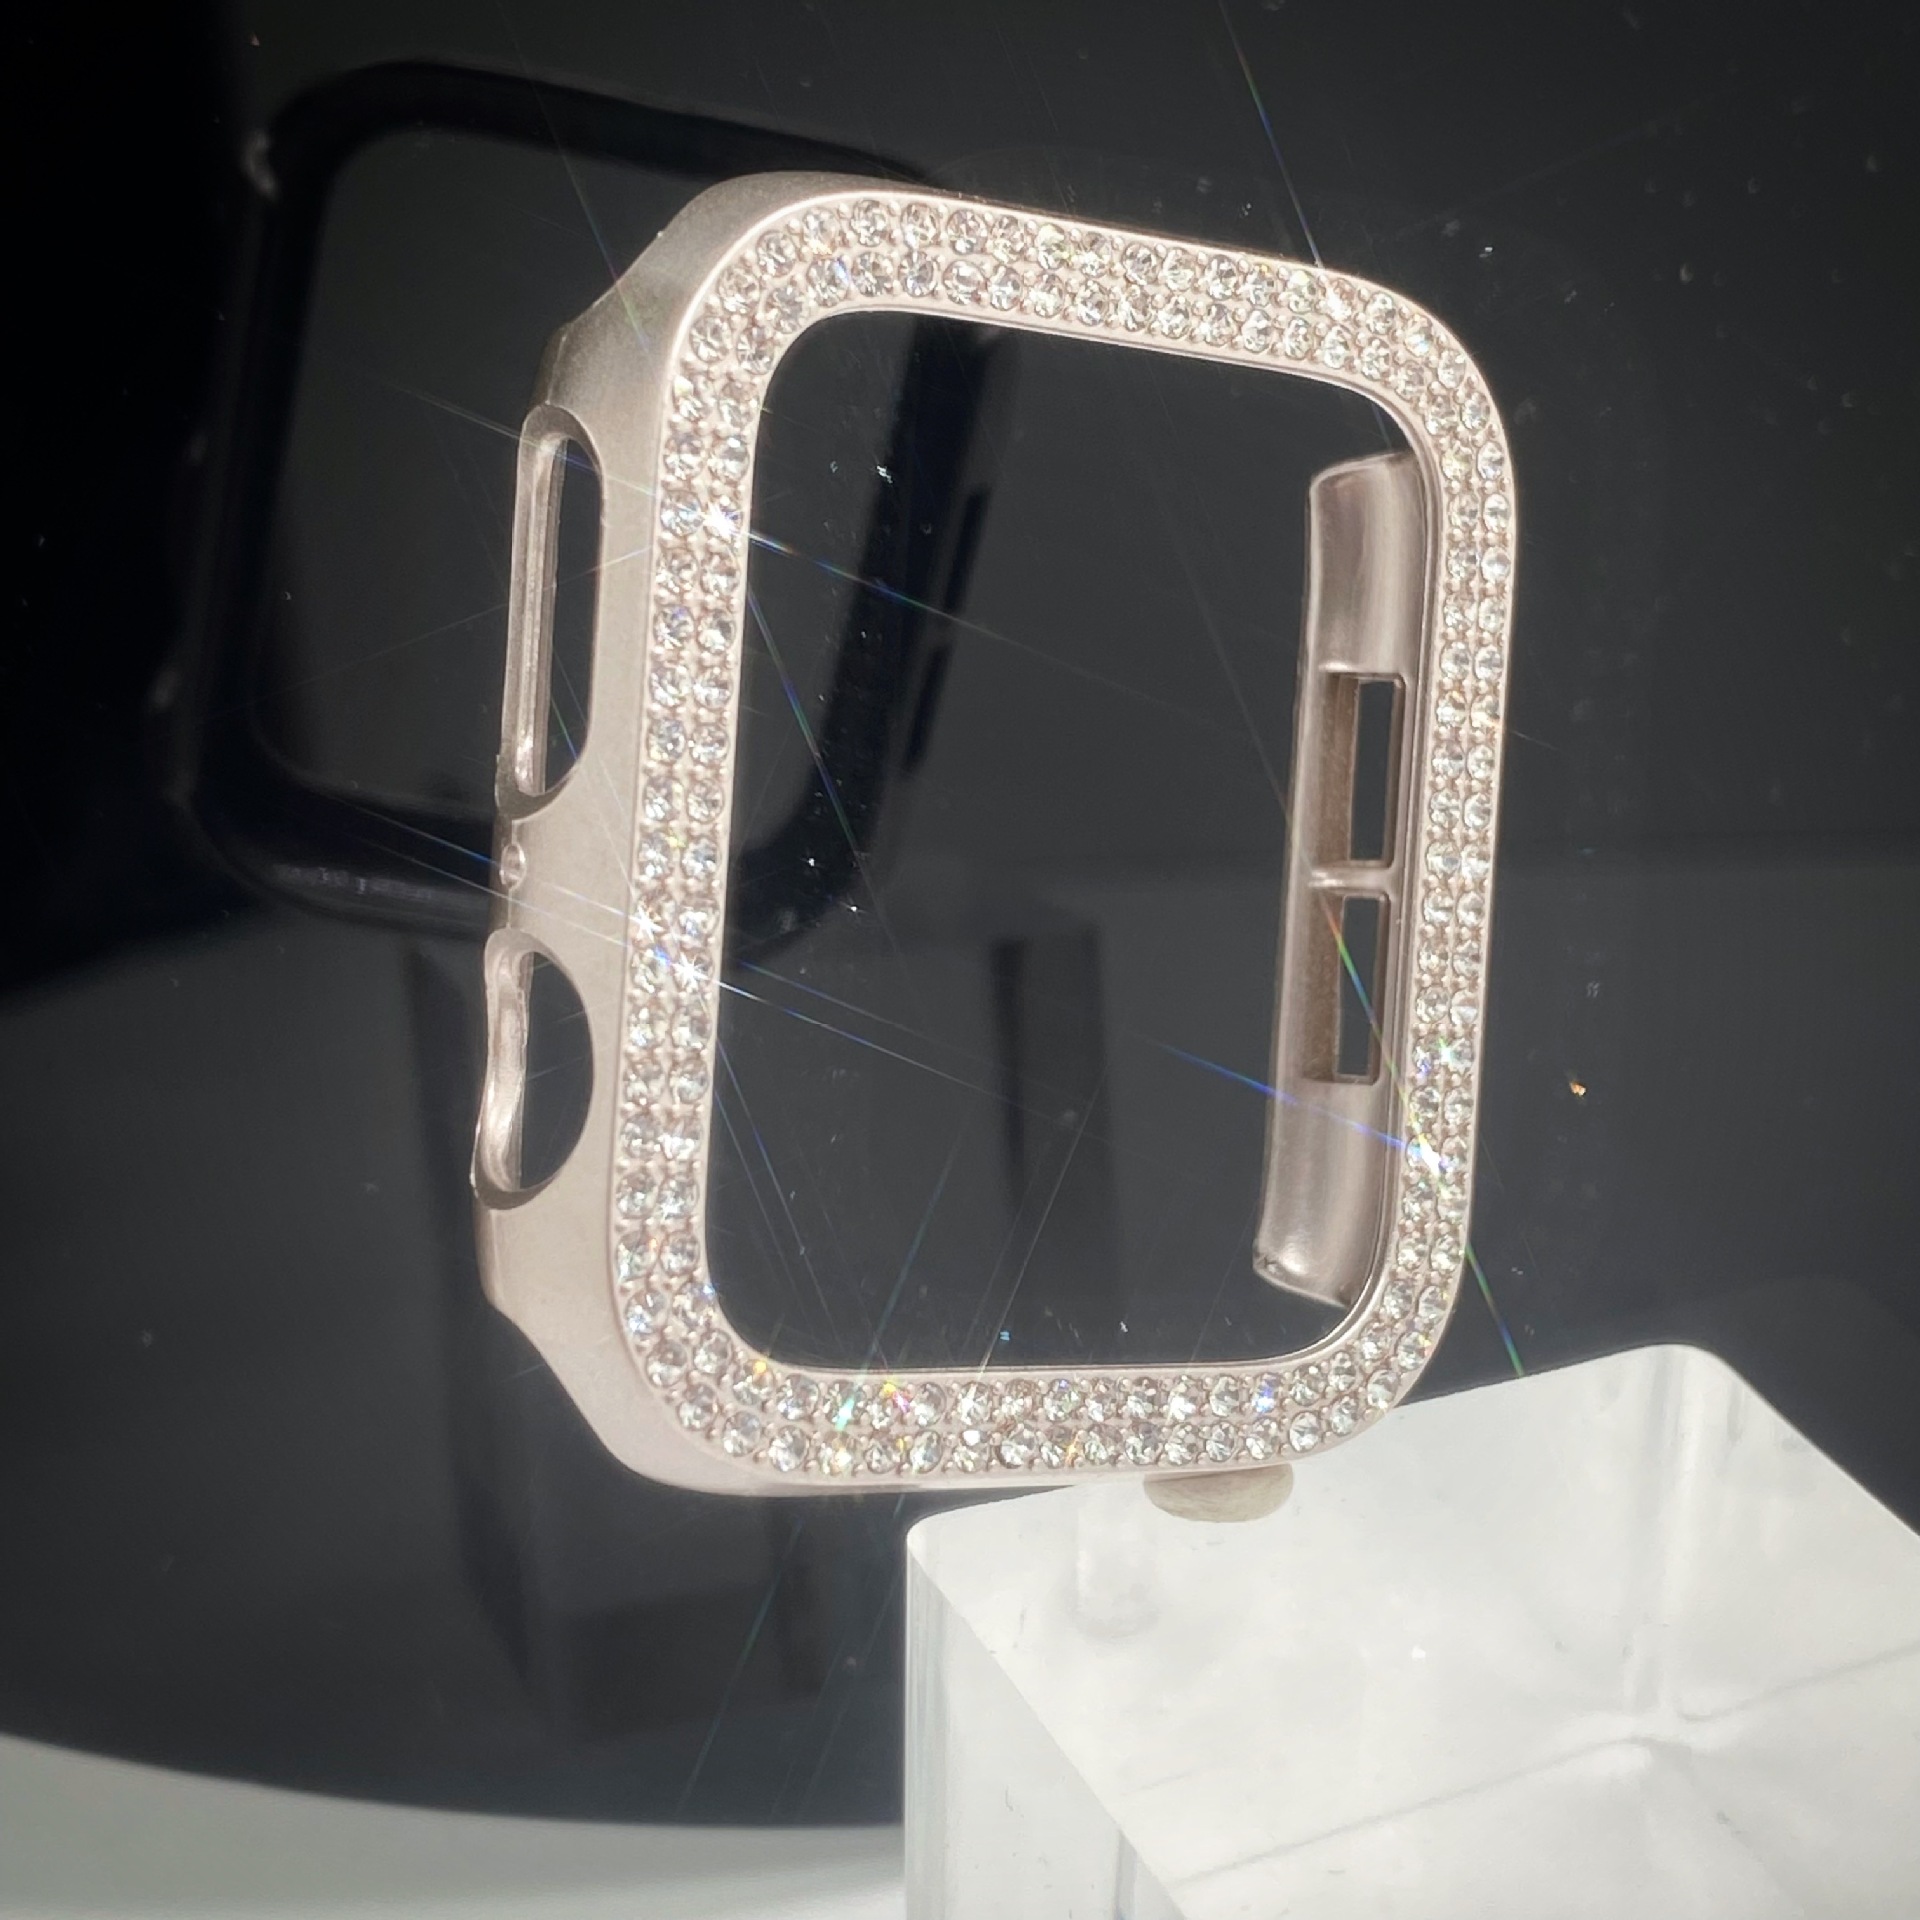 PC Plated Double Row Diamond Watch Case suitable for Apple Watch iWatch Protection Cover